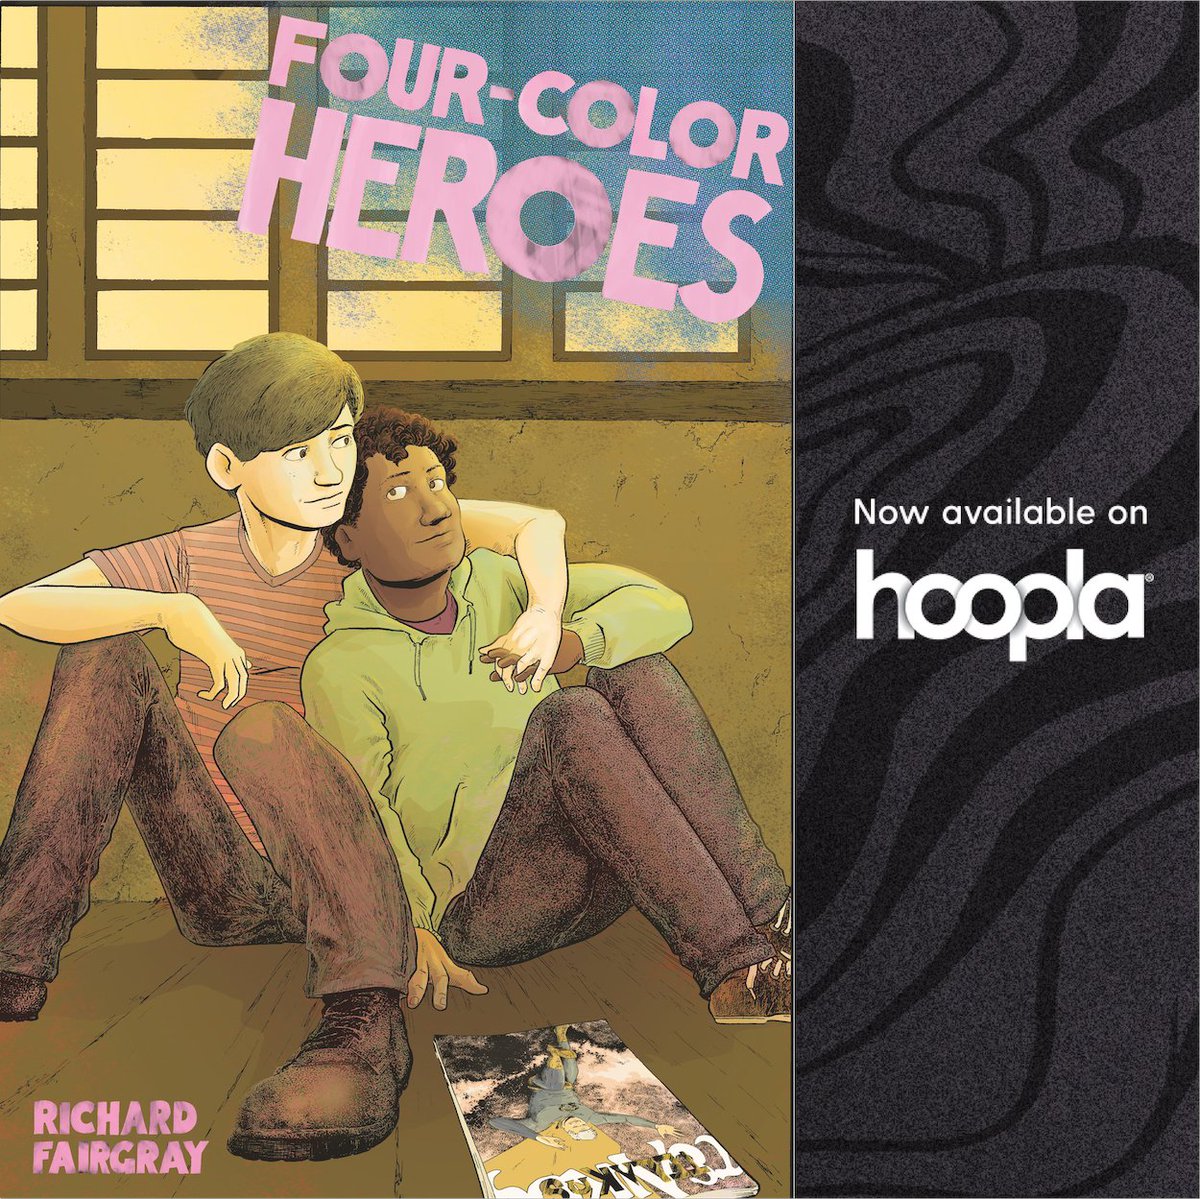 Have a #library card? @Fanbase_Press’ GLAAD-winning @4ColorHeroesGN is available at your library on @hoopladigital! 2 boys from wildly different worlds find love & self-discovery through #comics (@RichardFairgray) #LGBTQIA #MentalHealth #GraphicMedicine hoopladigital.com/title/15926779